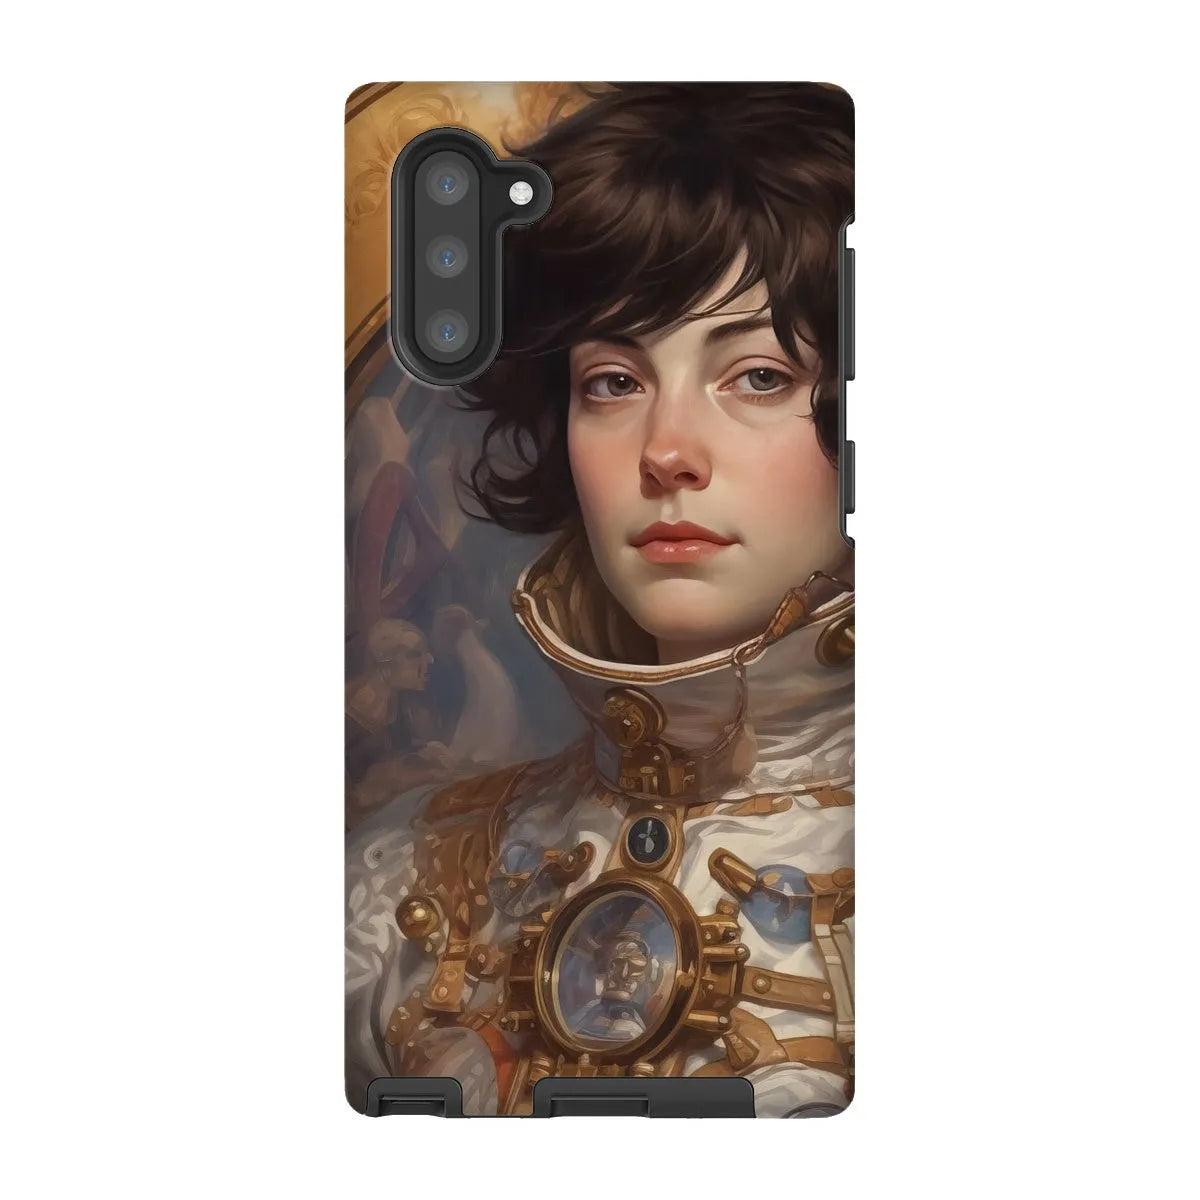 Chloé The Lesbian Astronaut - Space Aesthetic Art Phone Case - Samsung Galaxy Note 10 / Matte - Mobile Phone Cases